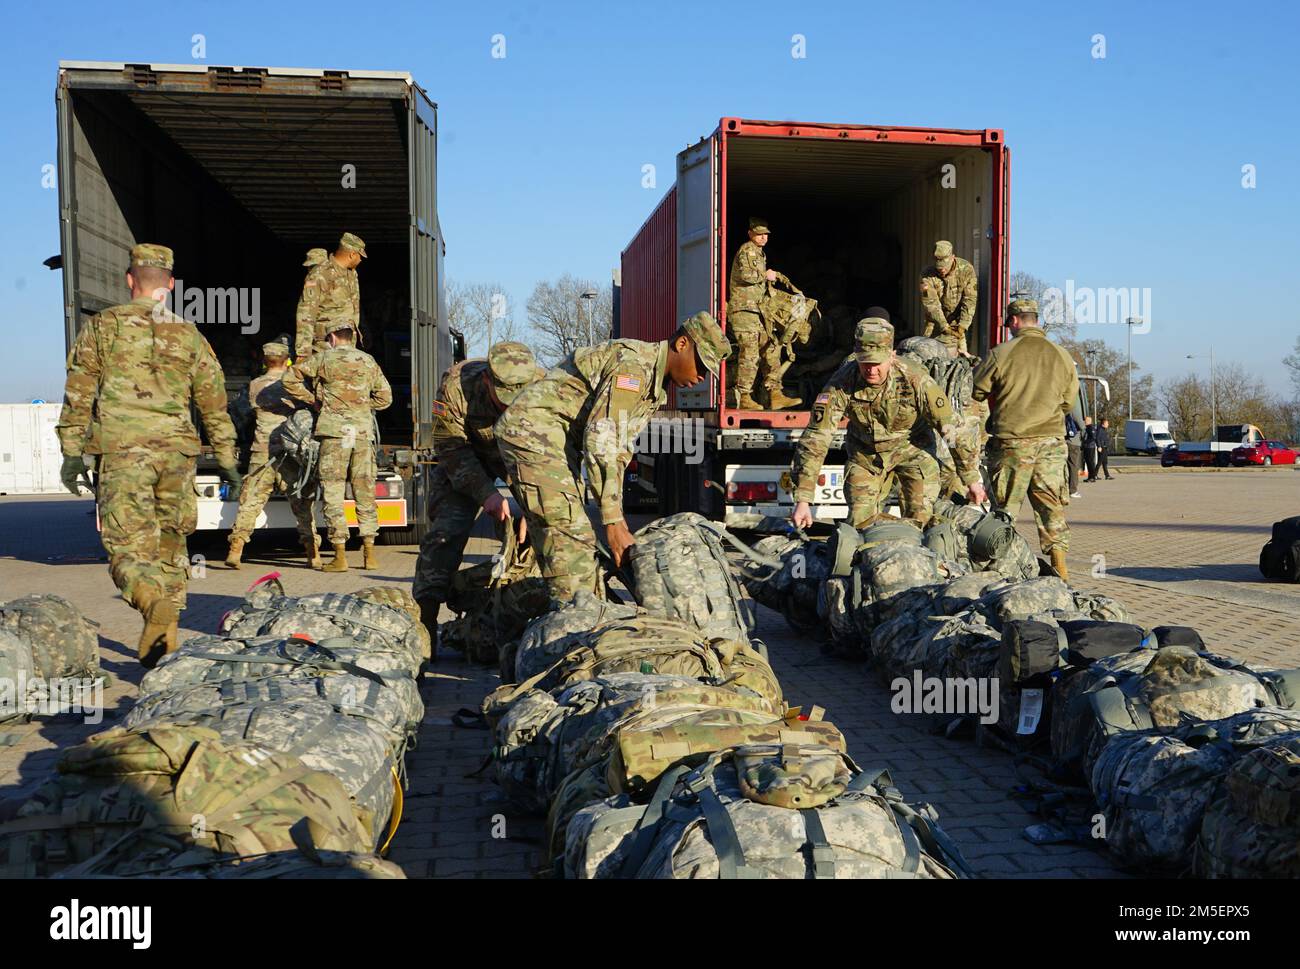 Soldiers from V Corps, Fort Knox, Ky., unload baggage from trucks on Barton Barracks, Ansbach, Germany, March 8, 2022, as part of a deployment to Germany to build readiness, improve interoperability, reinforce allies and deter further Russian aggression. The deployment of U.S. forces here is a prudent measure that underpins NATO’s collective war-prevention aims, defensive orientation and commitment to protect all Allies. Stock Photo